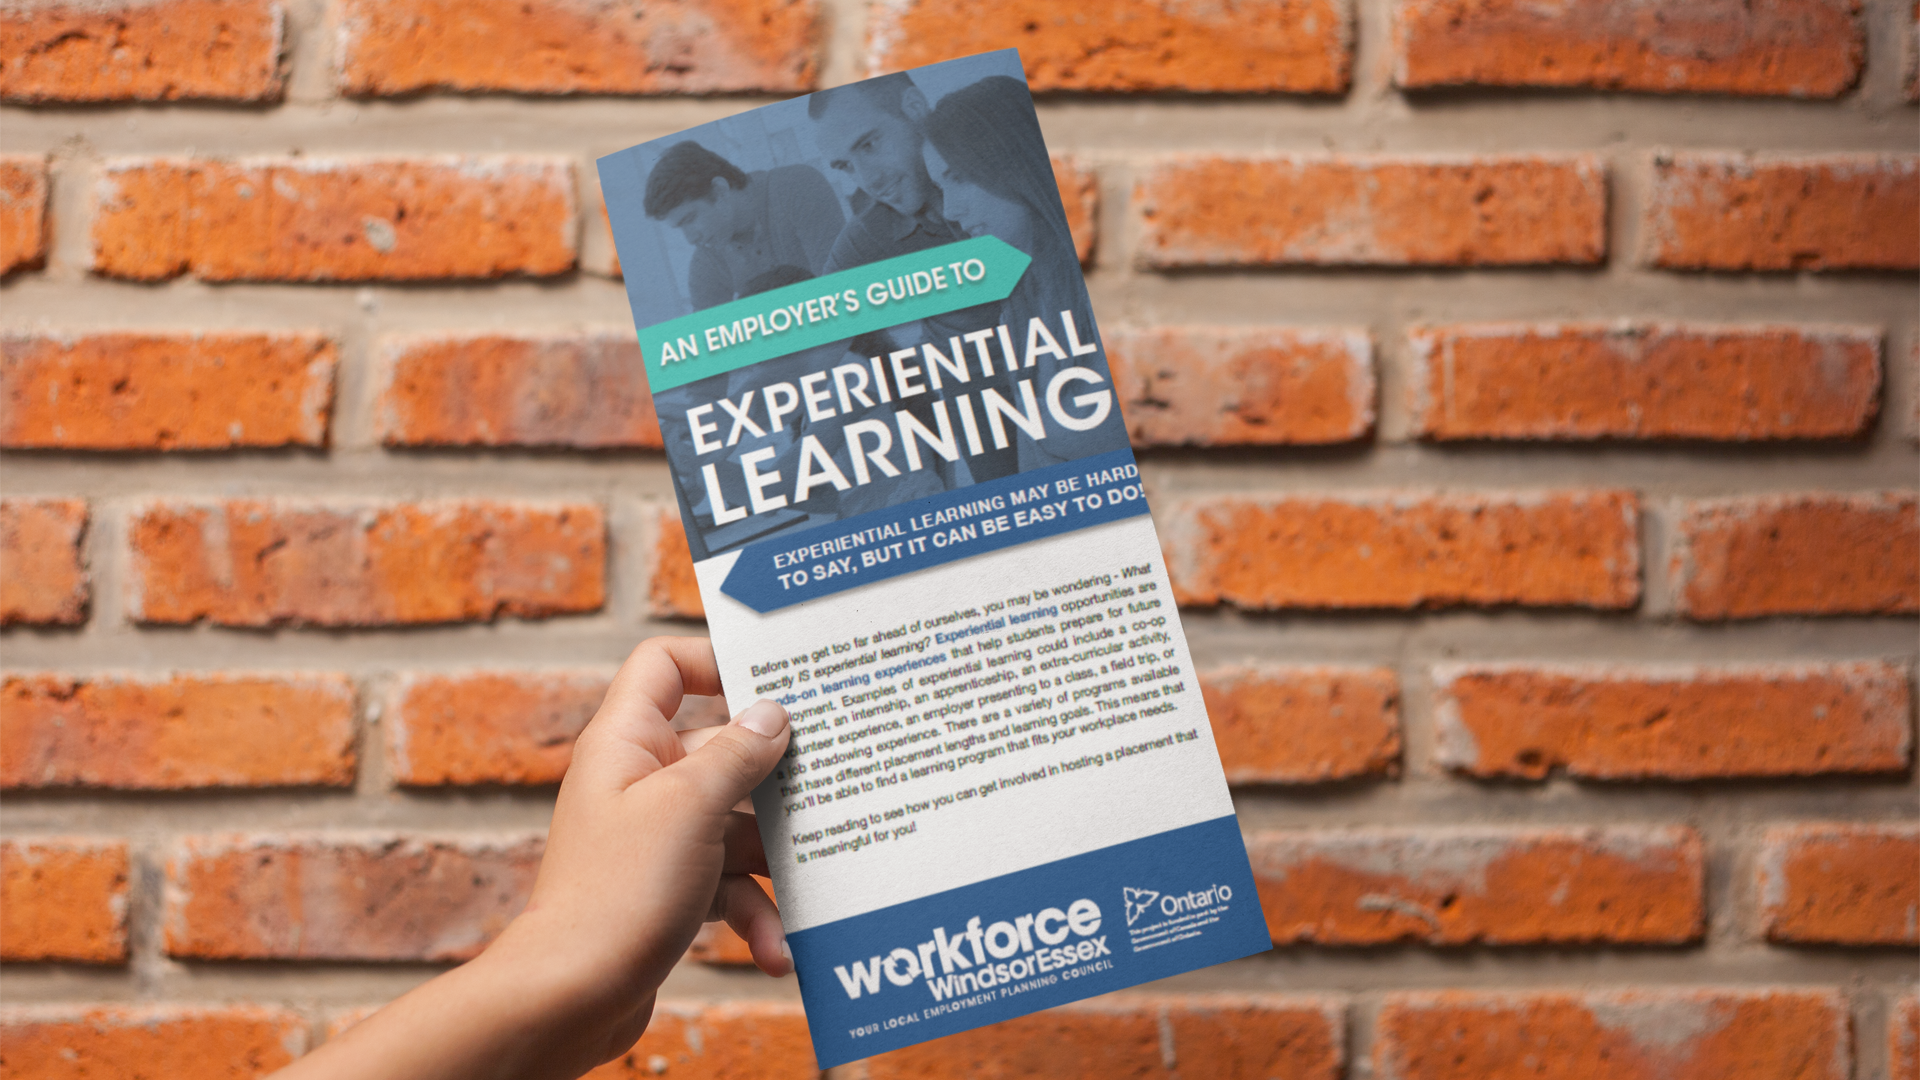 Person holding An Employer's Guide to Experiential Learning